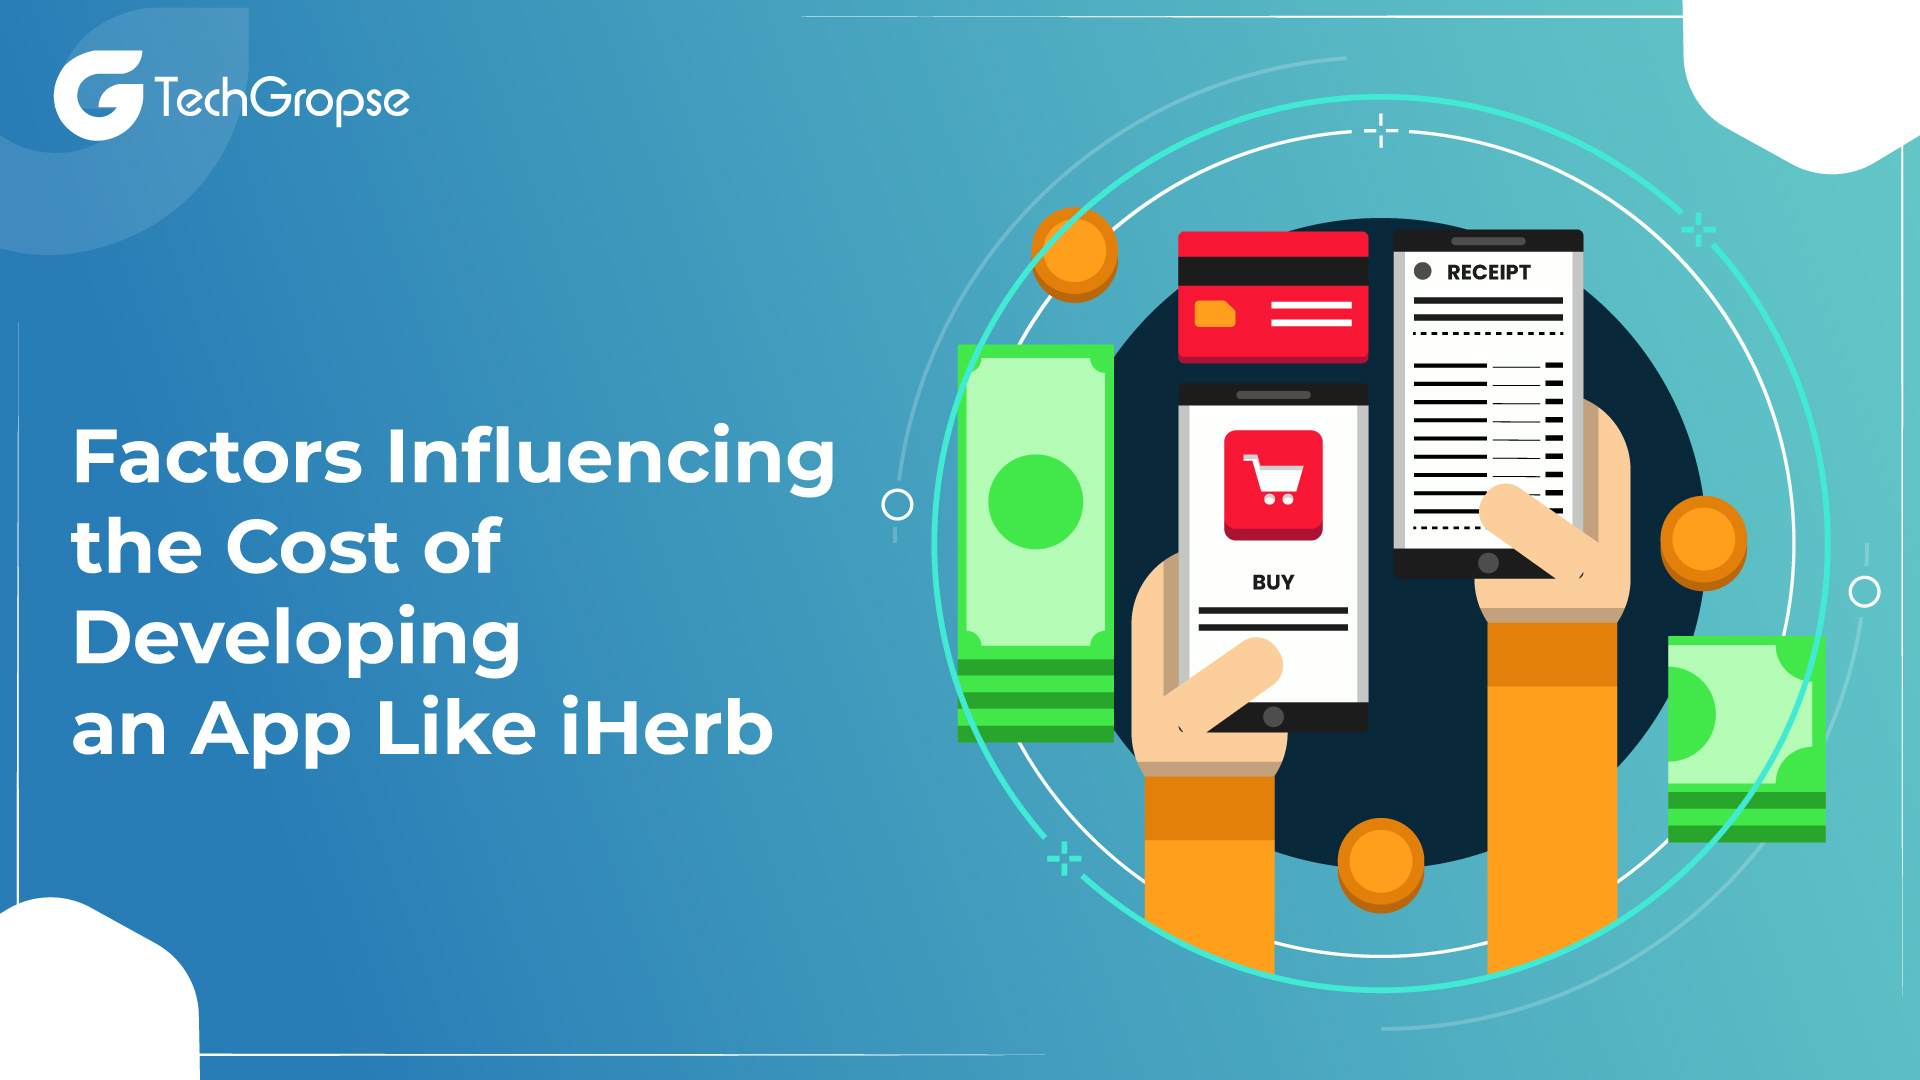 Factors Influencing the Cost of Developing an App Like iHerb